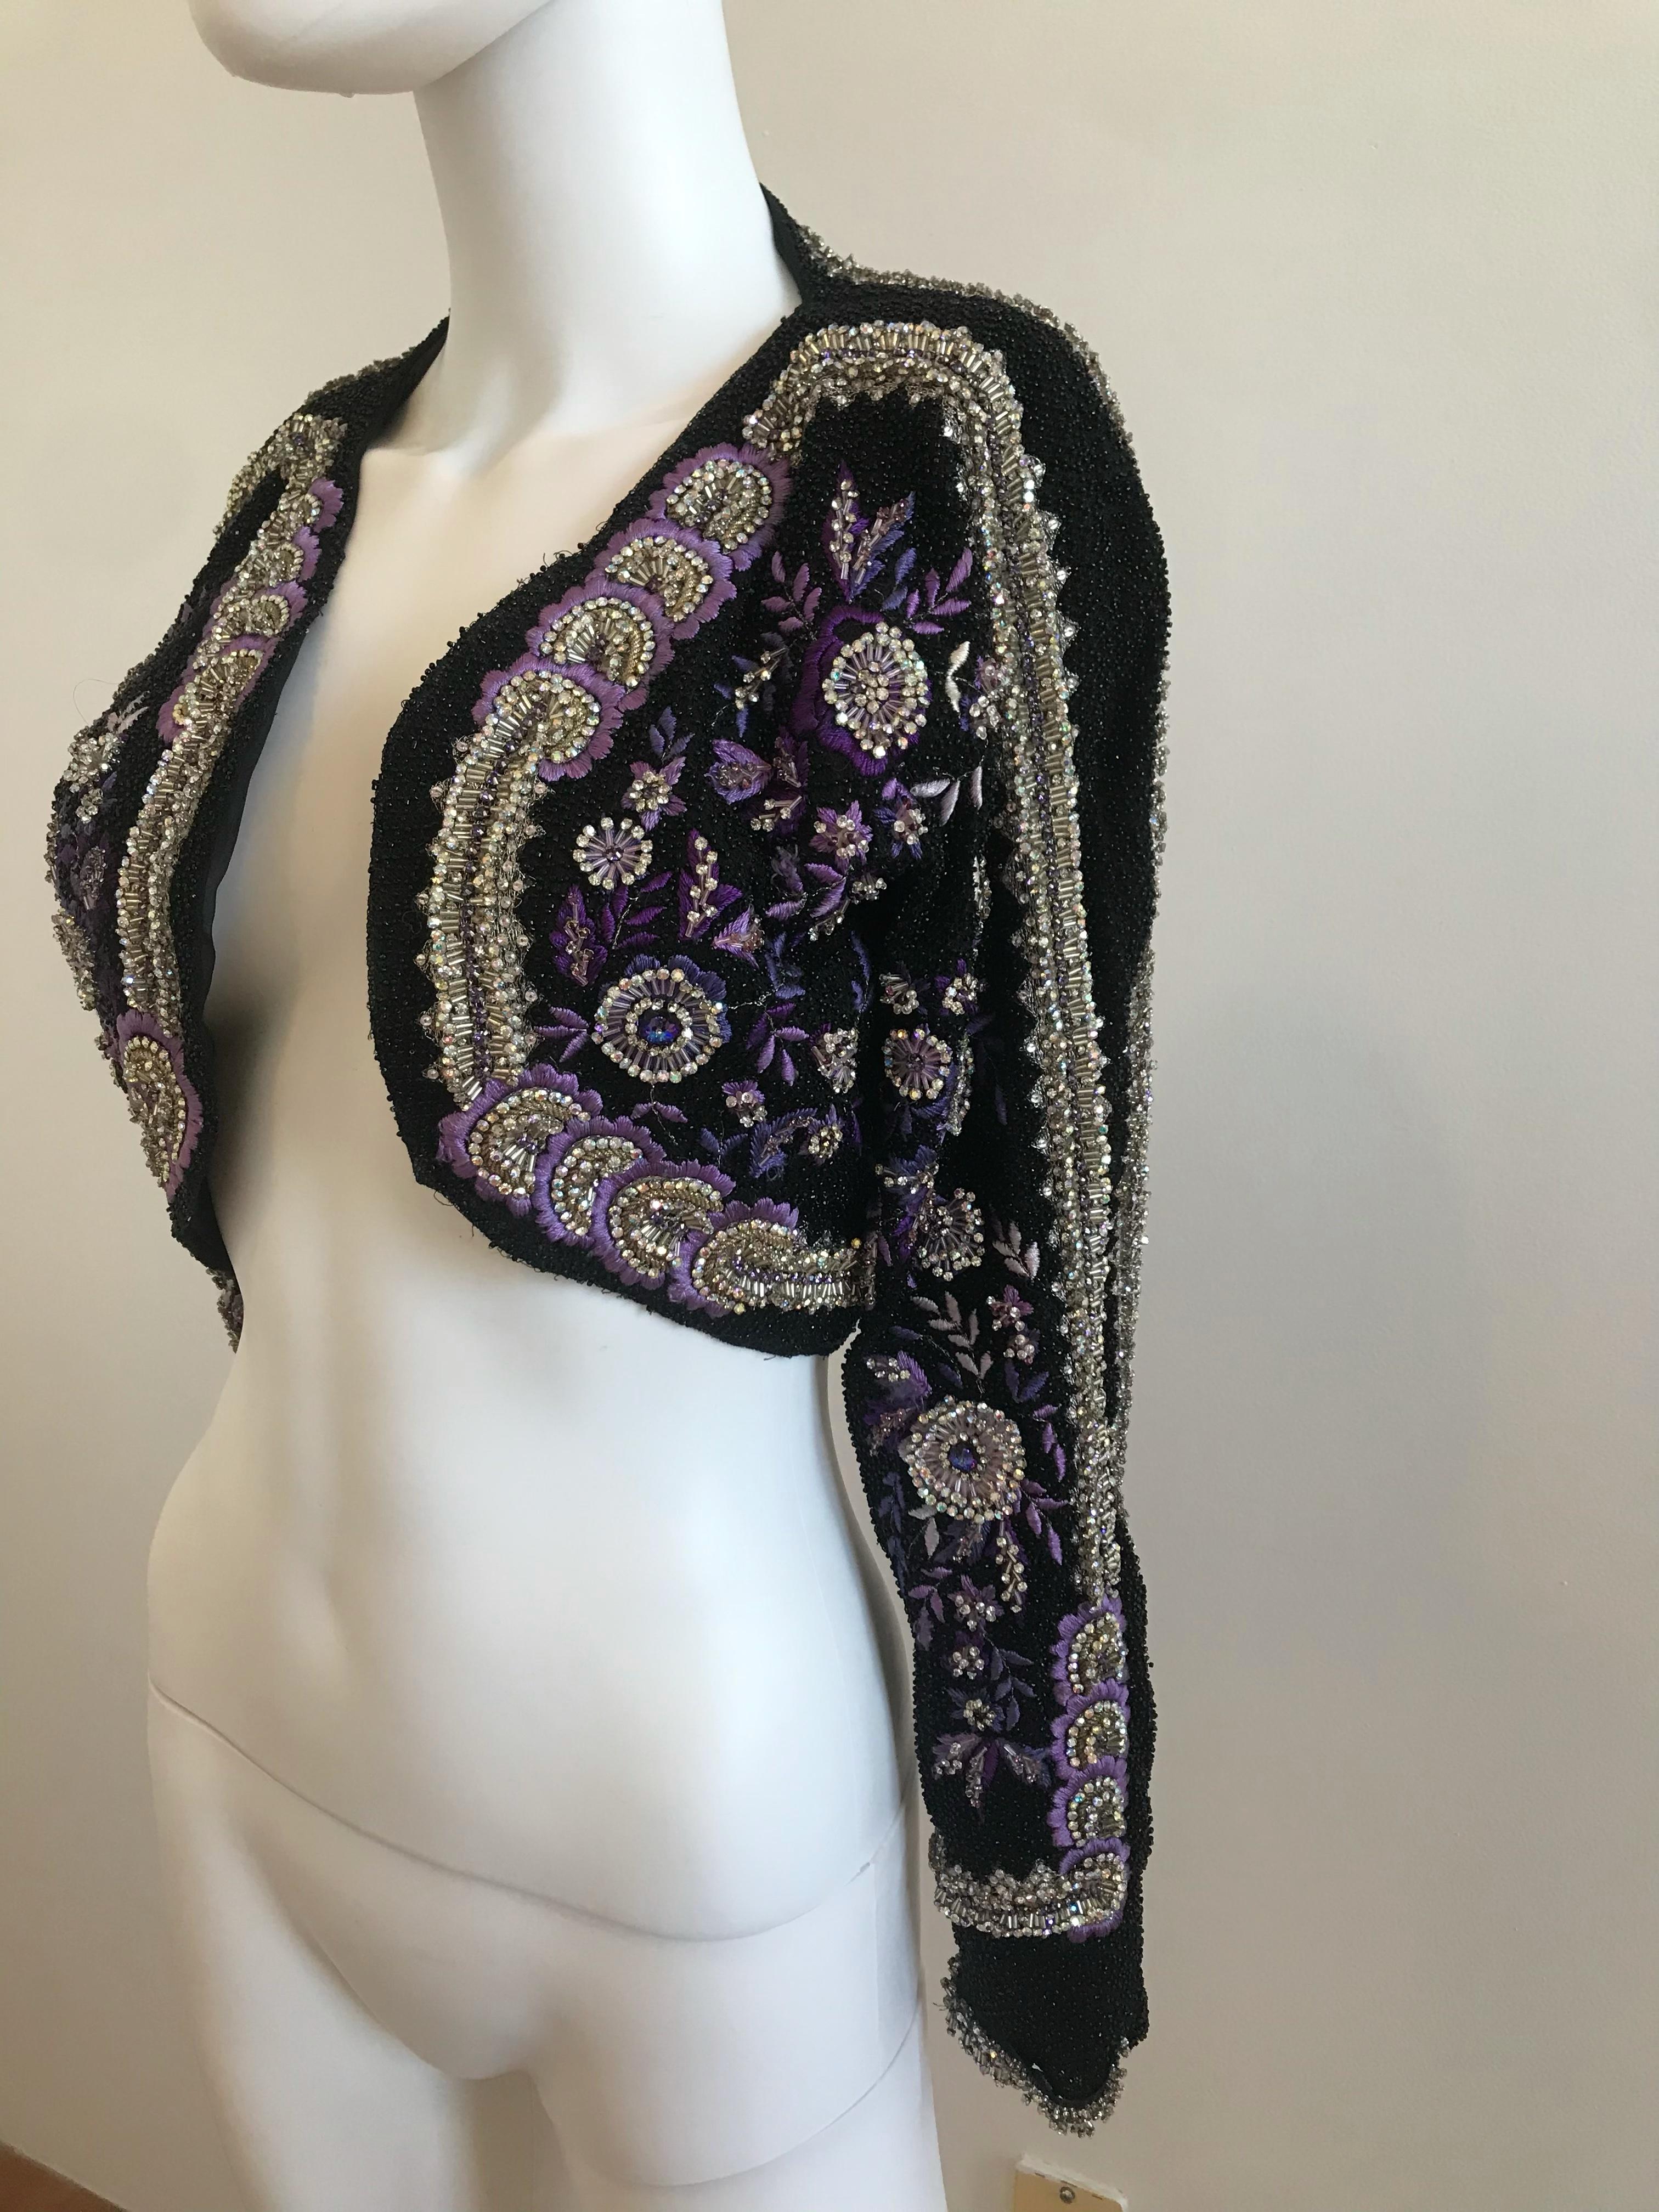 This Gianni Versace Couture Crystal Beaded and Embellished Cropped Bolero is extremely rare. It features a black beaded background with purple and rhinestone floral detailing. It is truly magnificent. The size tag has been removed. It fits a size US